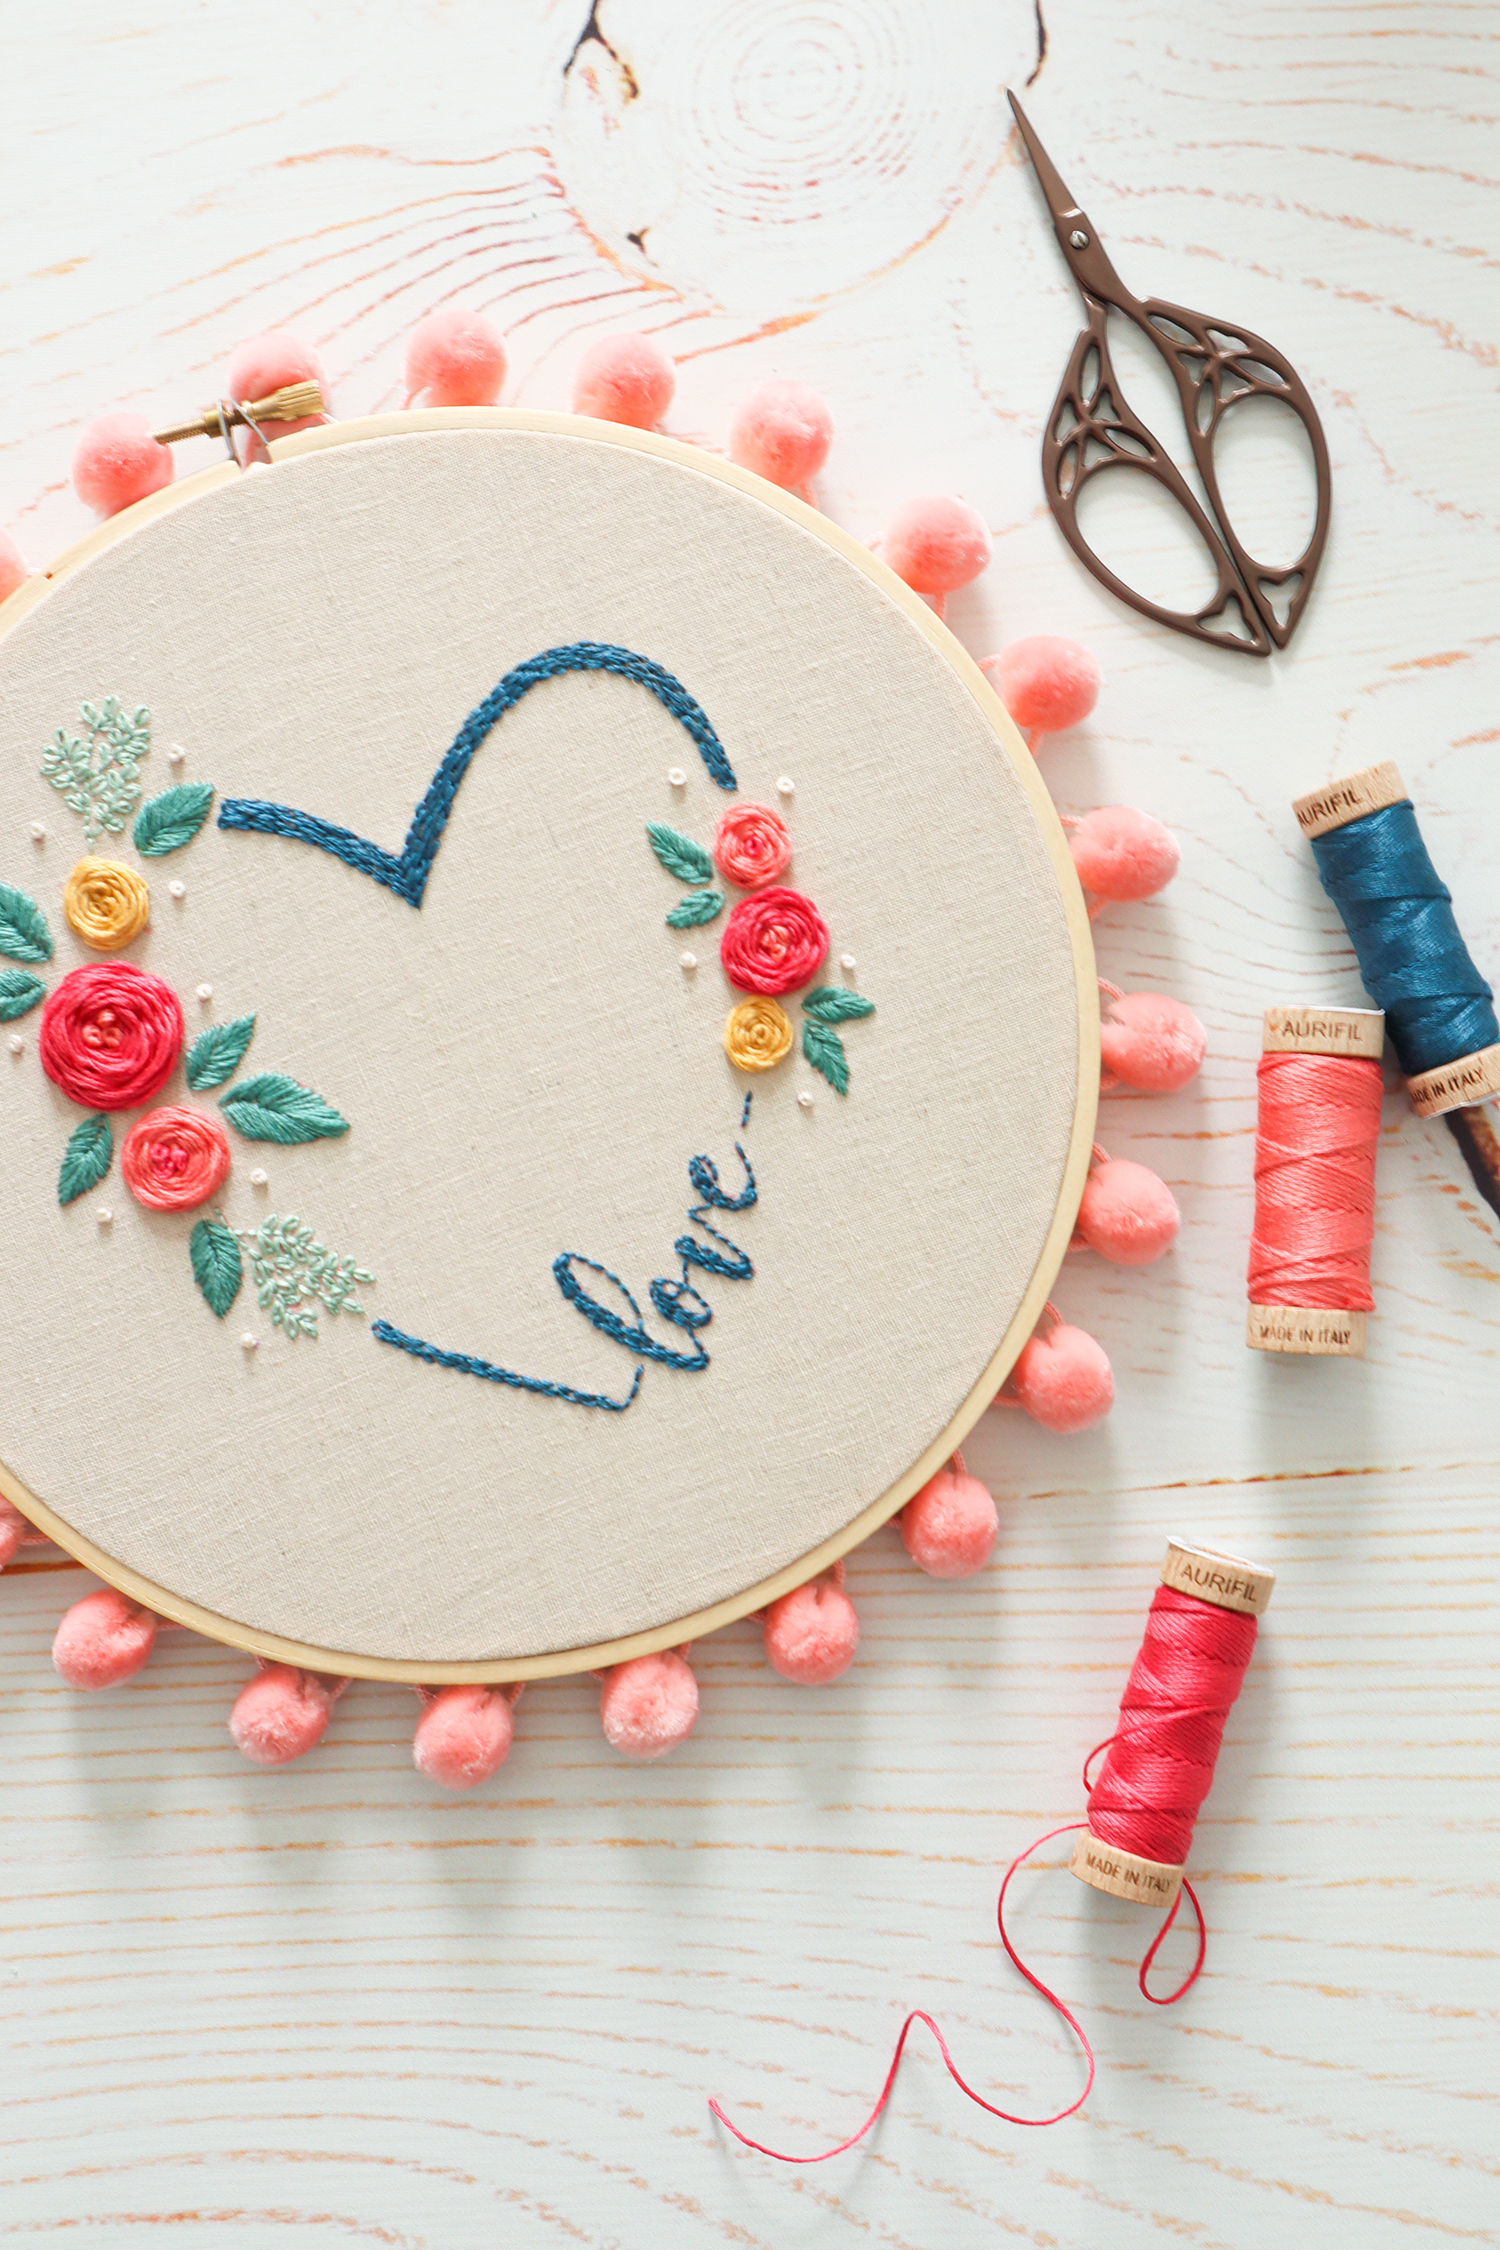 The best hand embroidery books for beginners - Swoodson Says